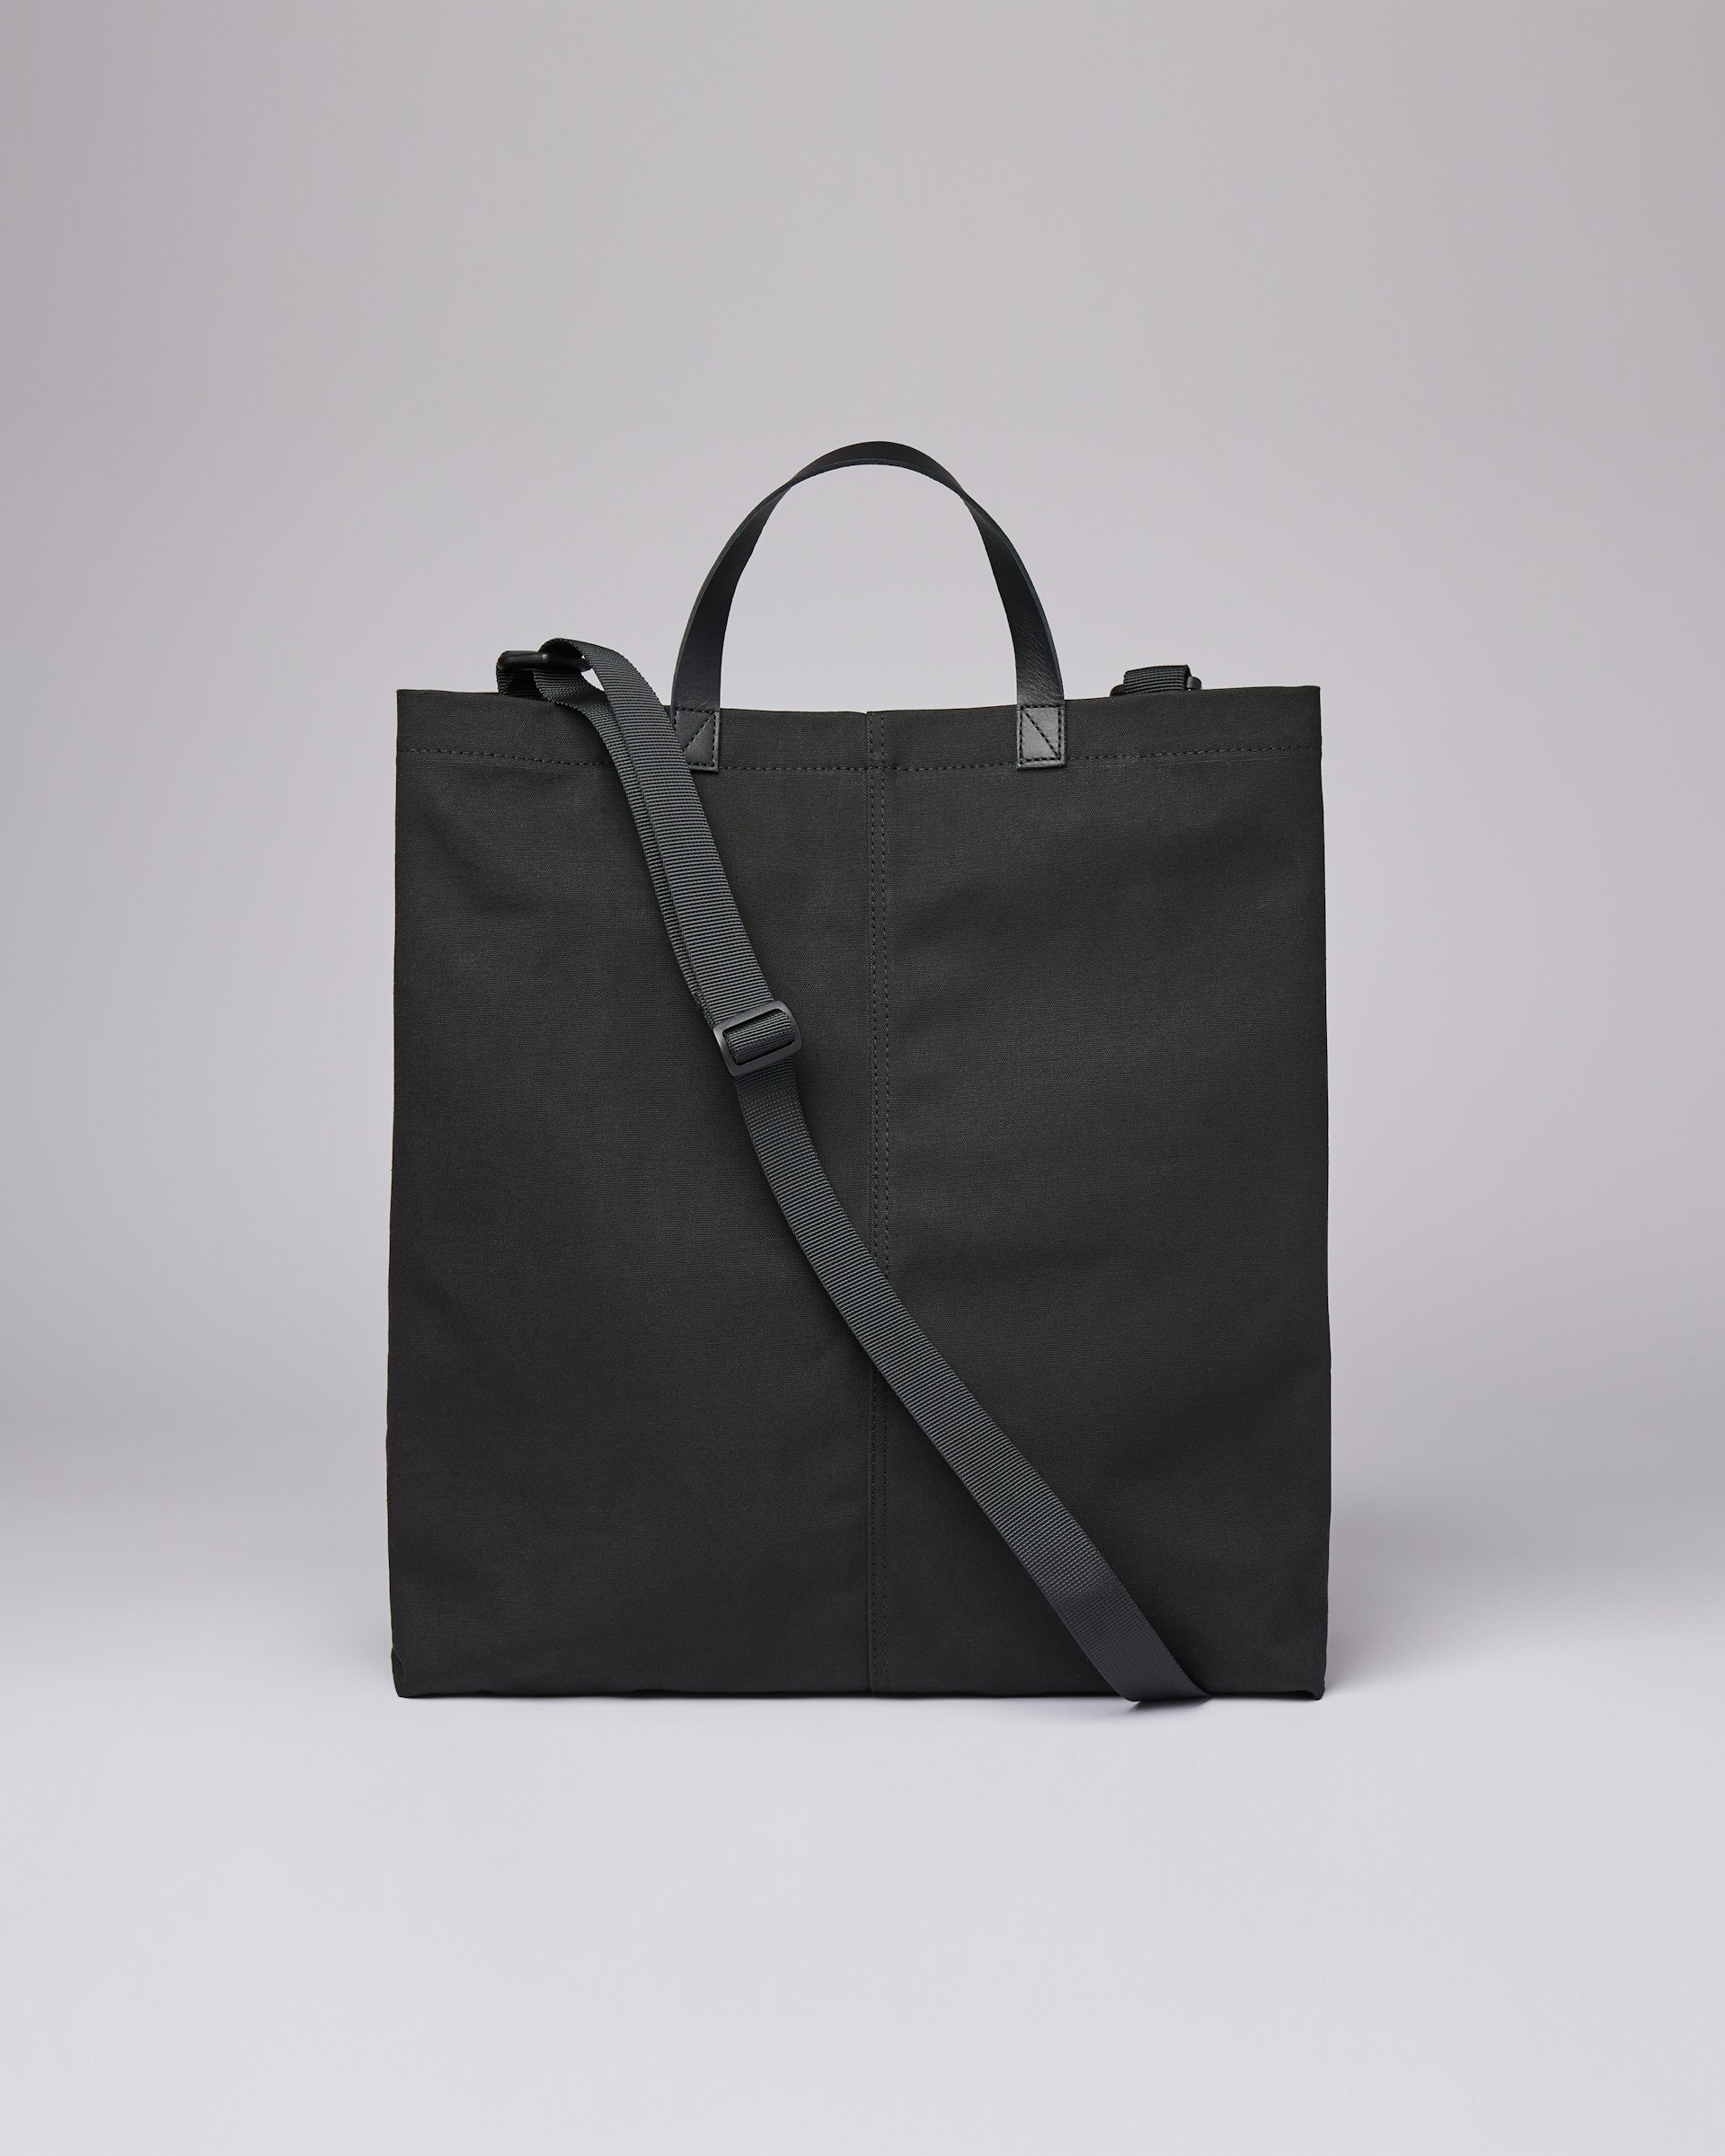 Frankie belongs to the category Tote bags and is in color black (3 of 7)